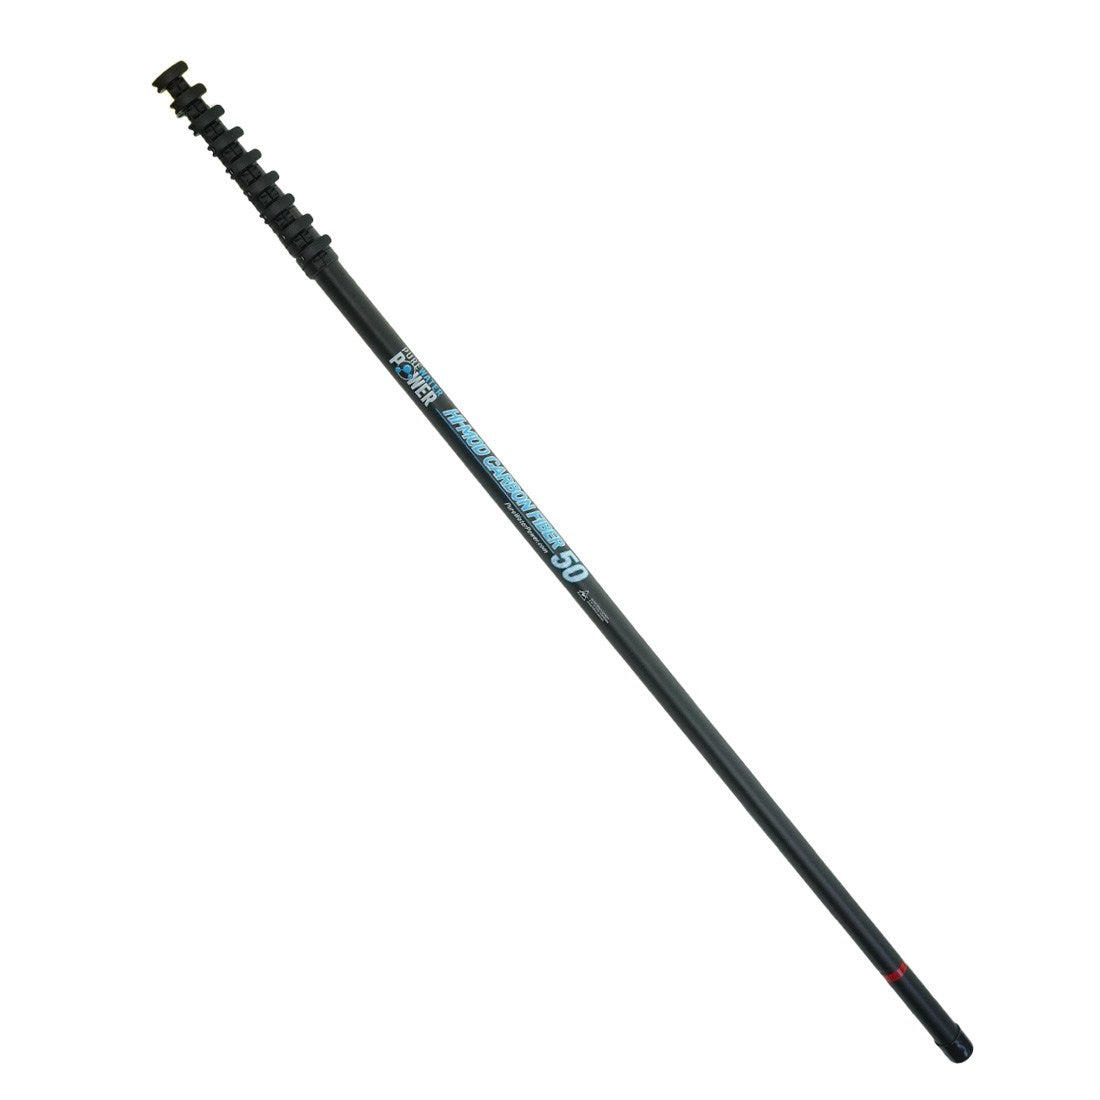 PWP High Mod Carbon Fiber Water Fed Pole, Water Fed Poles